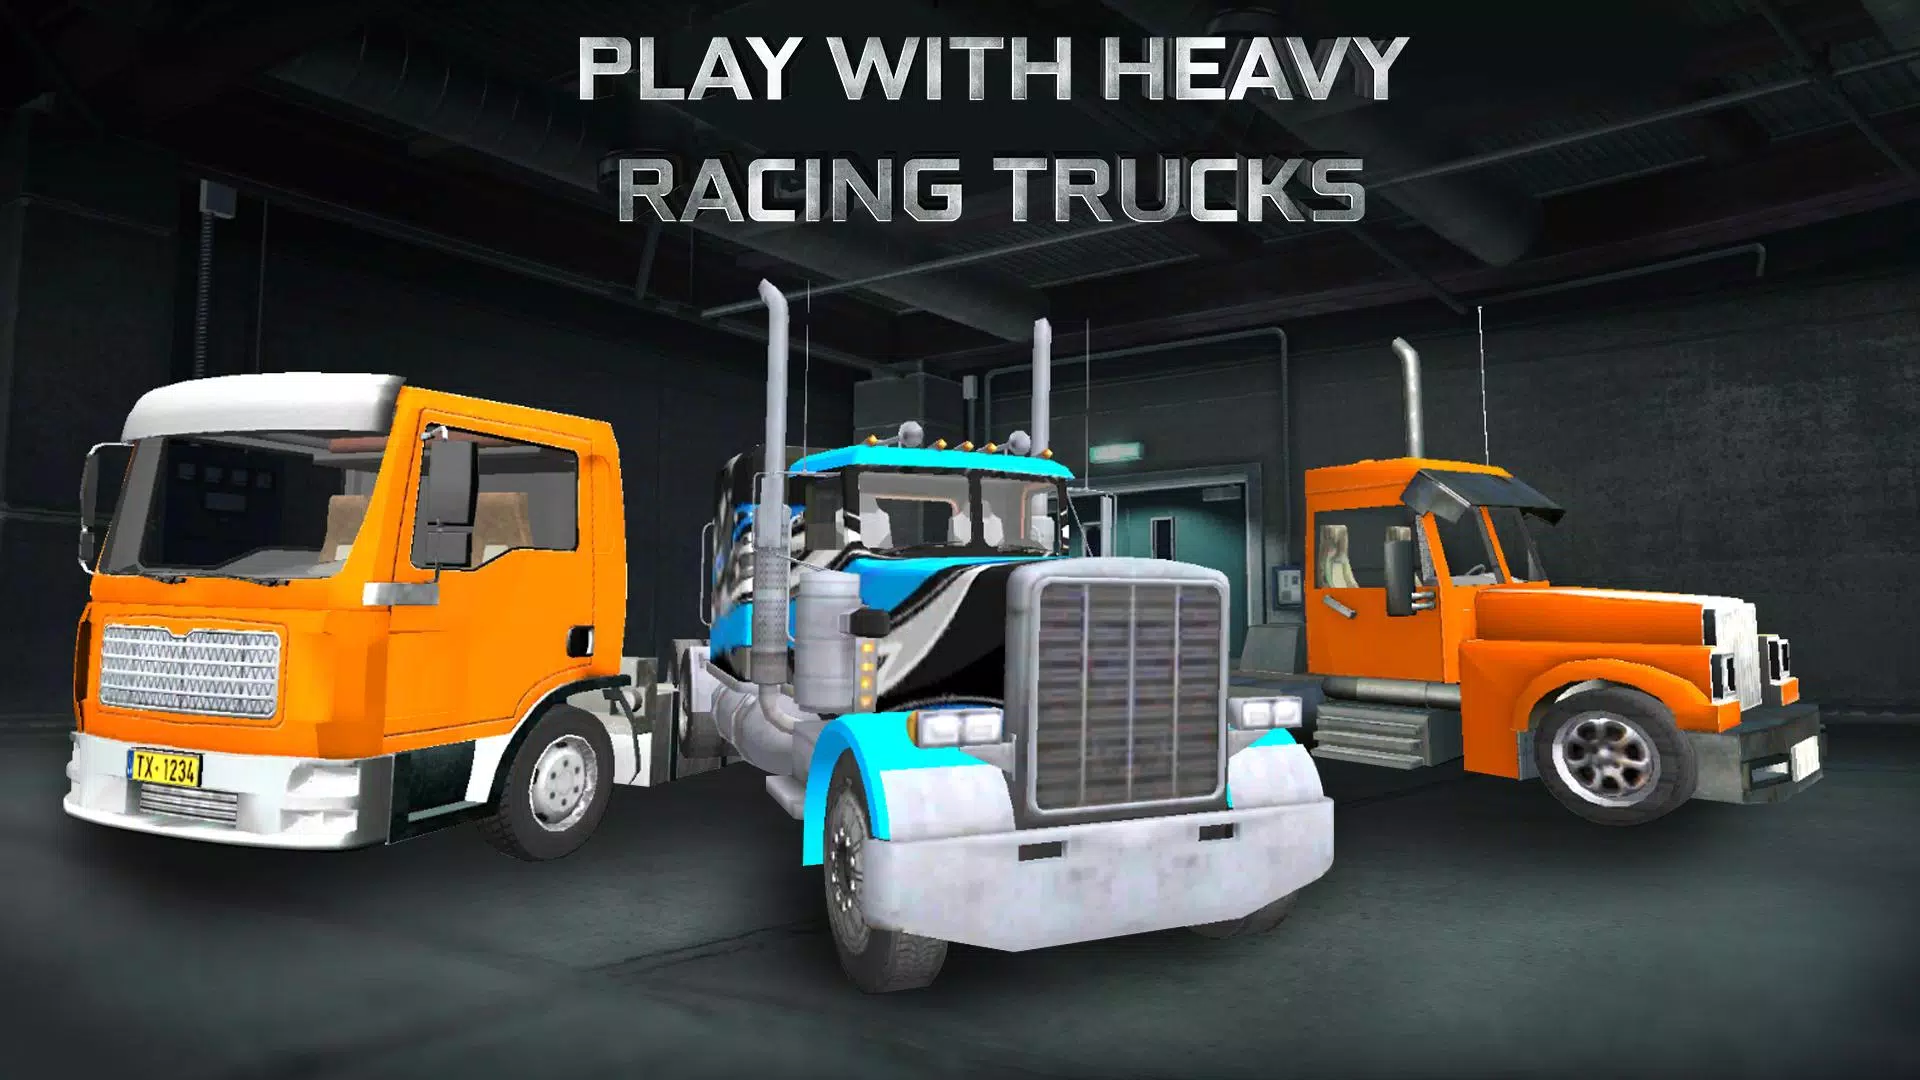 India Vs Pakistan Cargo Truck Apk For Android Download